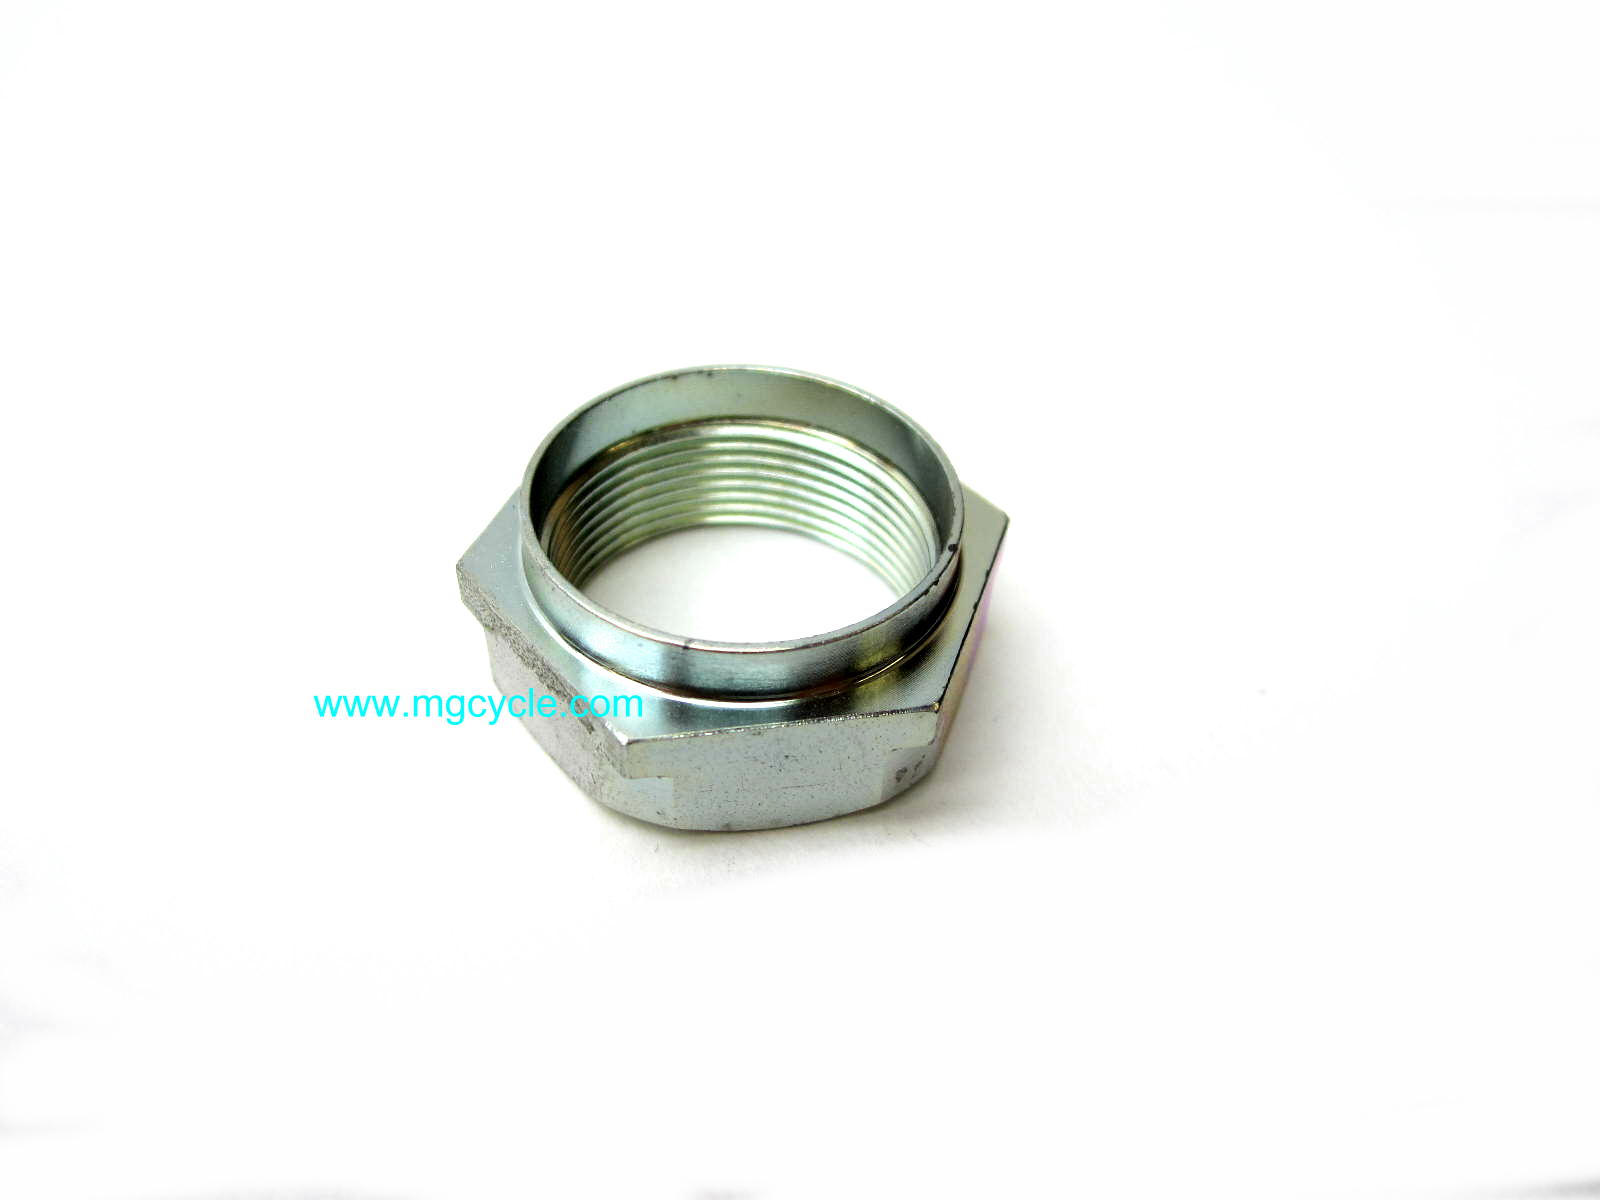 Output shaft securing nut can be used on input shaft GU14219310